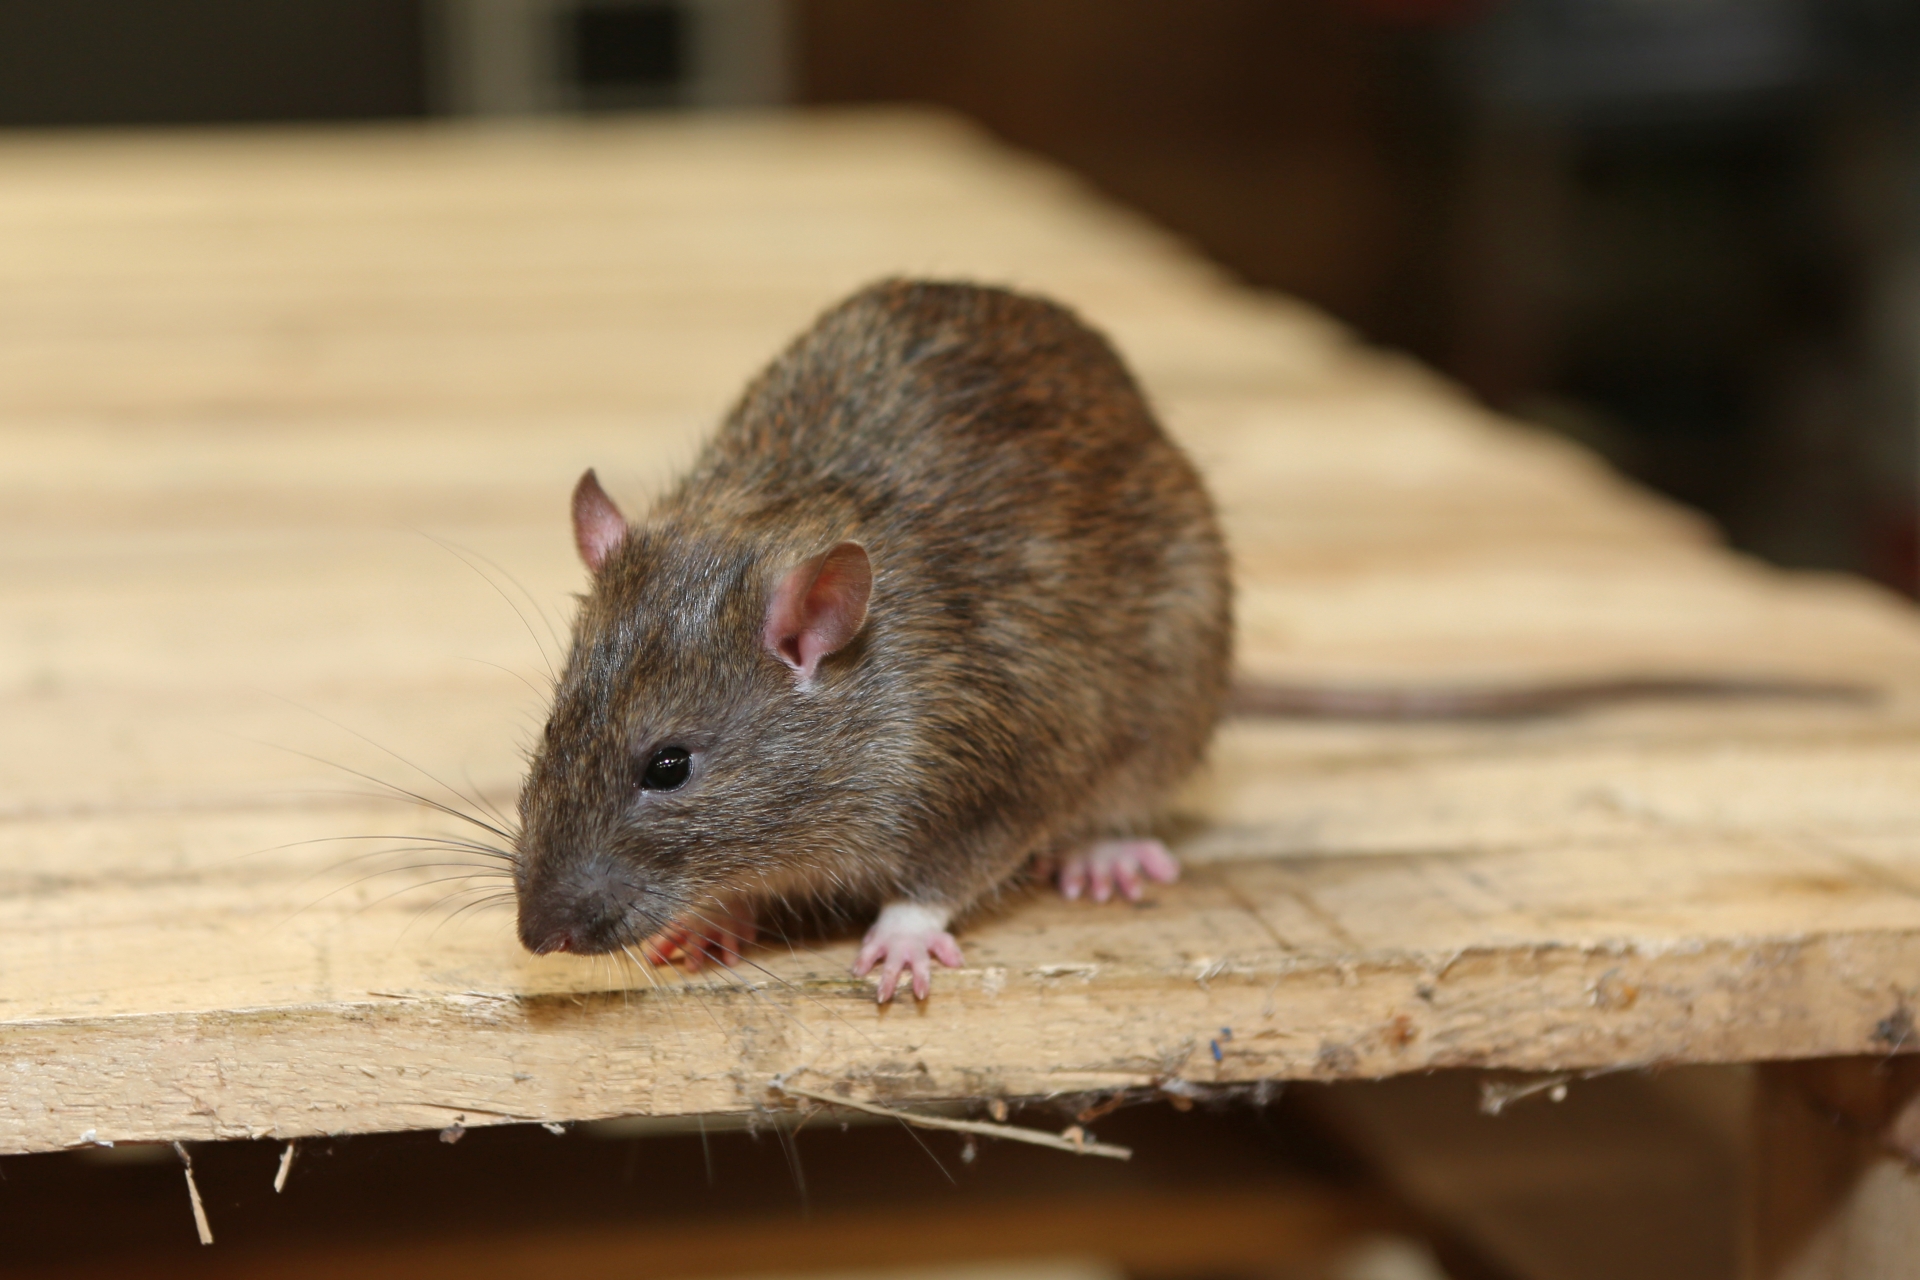 Rat extermination, Pest Control in Camden Town, NW1. Call Now 020 8166 9746